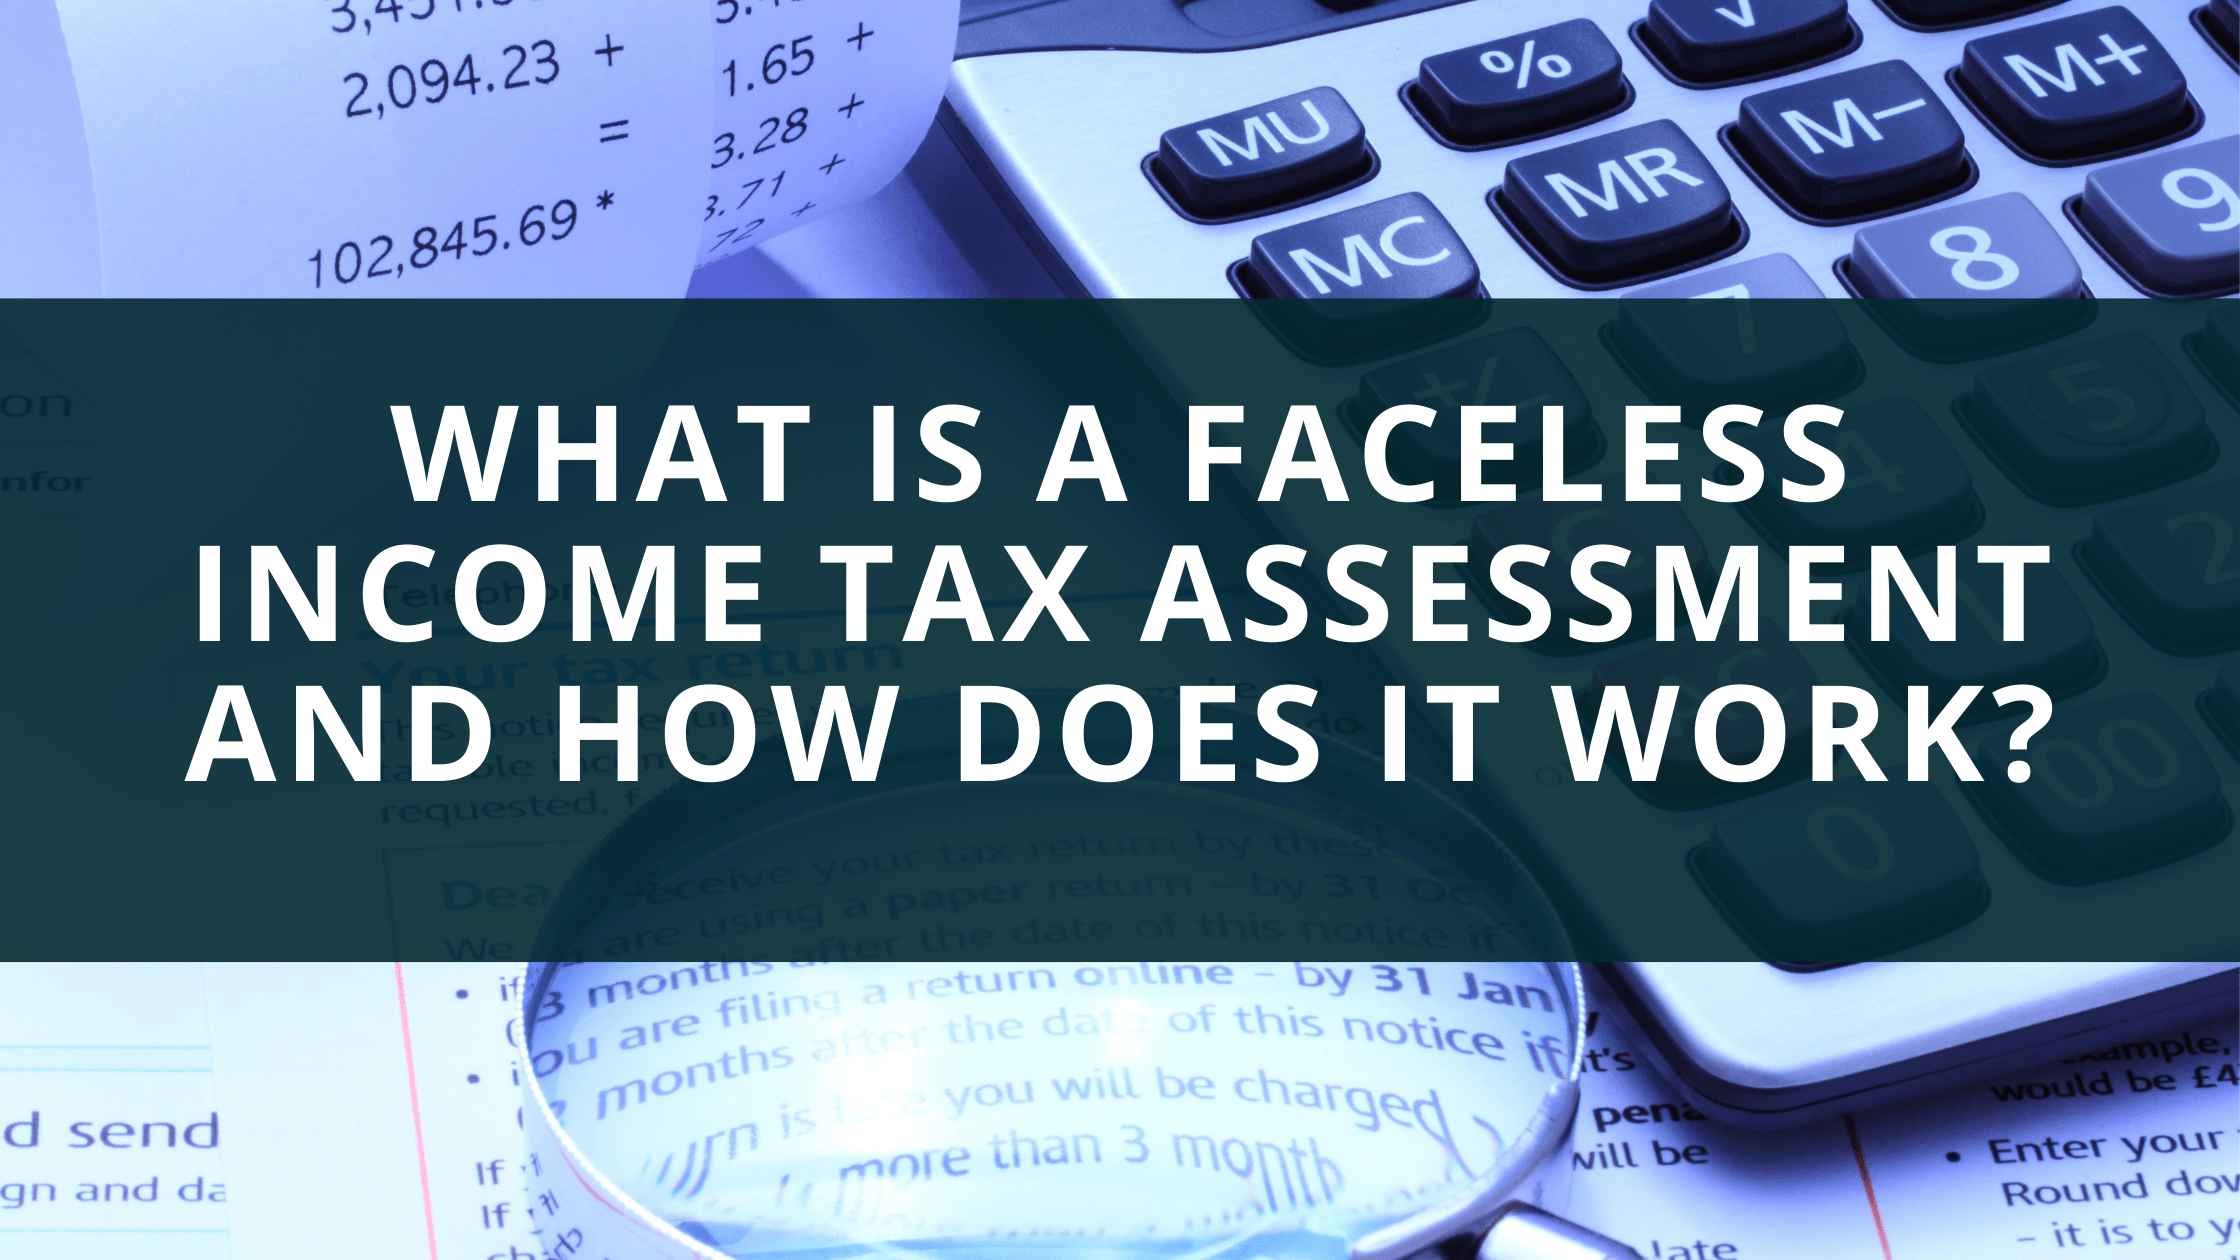 Faceless income tax assessment and how does it work?